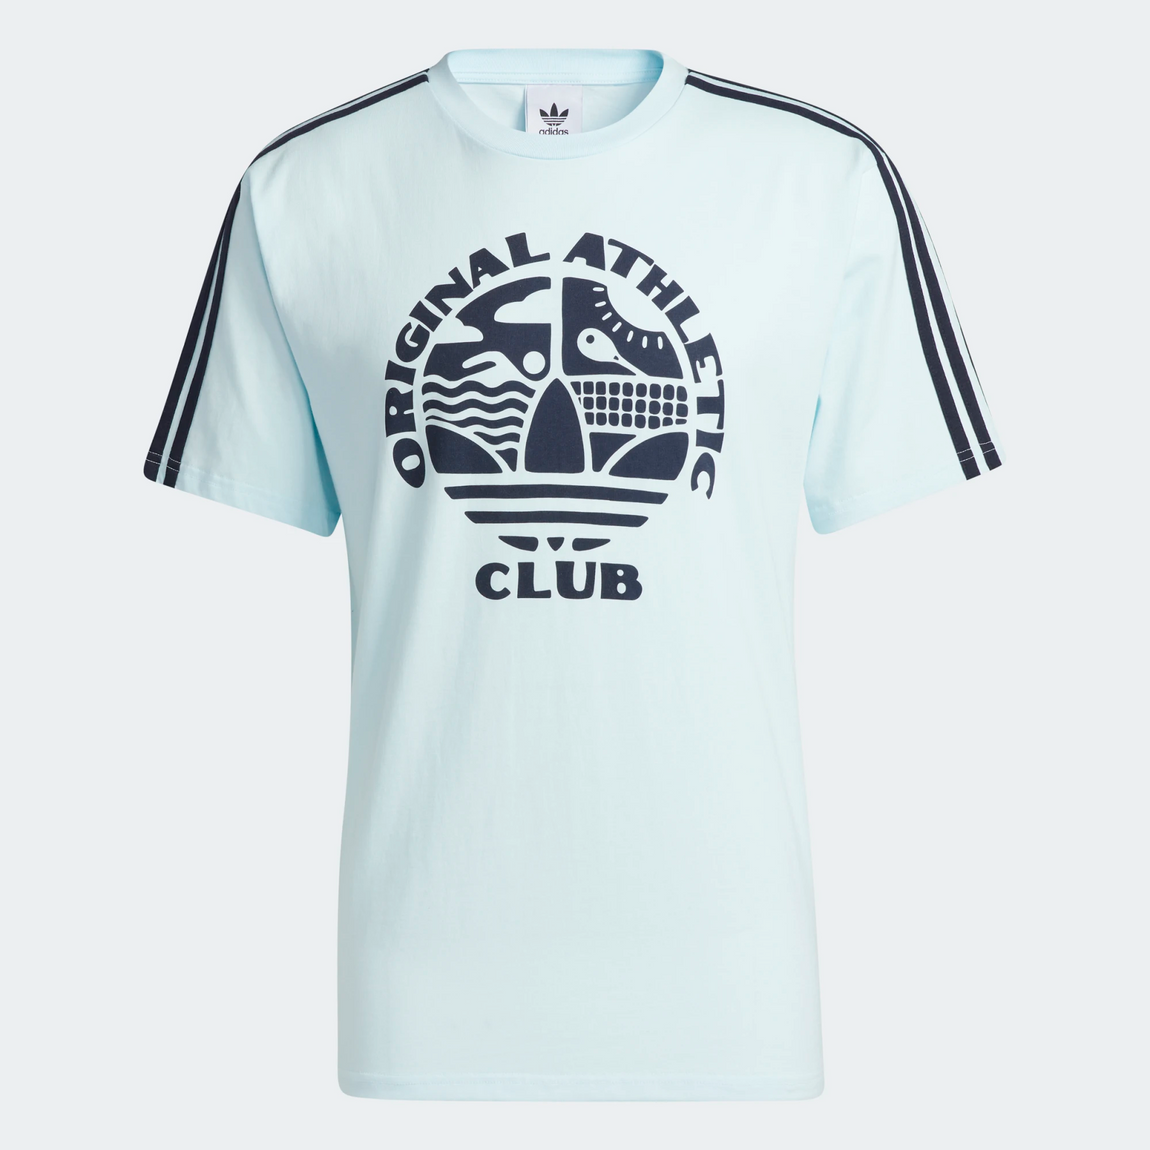 Adidas OAC 3-Stripes Tee (Almost Blue/Legend Ink) - Adidas OAC 3-Stripes Tee (Almost Blue/Legend Ink) - 